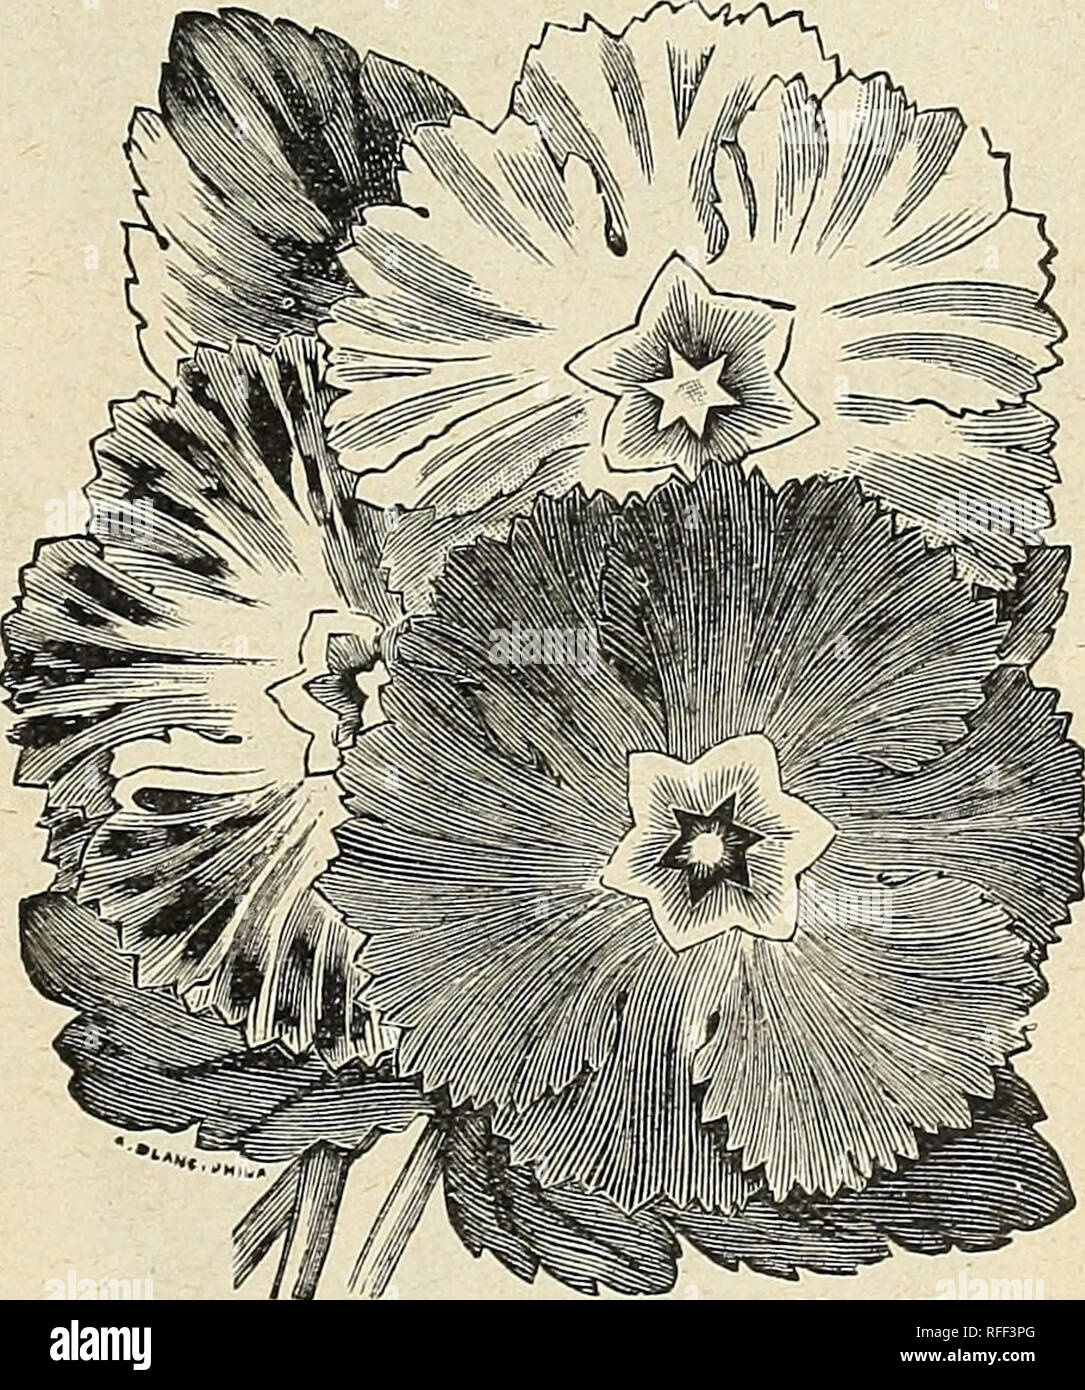 . Wm. Ewing &amp; Co.'s seed catalogue. Nursery stock Que?bec (Province) Montre?al Catalogs; Vegetables Seeds Catalogs; Grasses Seeds Catalogs; Flowers Seeds Catalogs; Plants, Ornamental Catalogs; Agricultural implements Catalogs. Tulip Poppy. No. 357. Pkt. cts. 360- POBTULACCA Grandiflora—h. h. a., % foot. Splendid double mixed 25 361. Single Mixed—h. h. a., */2 foot 5 Beautiful little annuals of extremely brilliant colors; iraKe a pretty bed in any sunny situation. PrimulaSinensis Fimbriata 362 363 364 365 366 367 368. 369 370 371 372 373 374 375 376 377 Alba—Pure white 50 Rubra—Red shades 5 Stock Photo